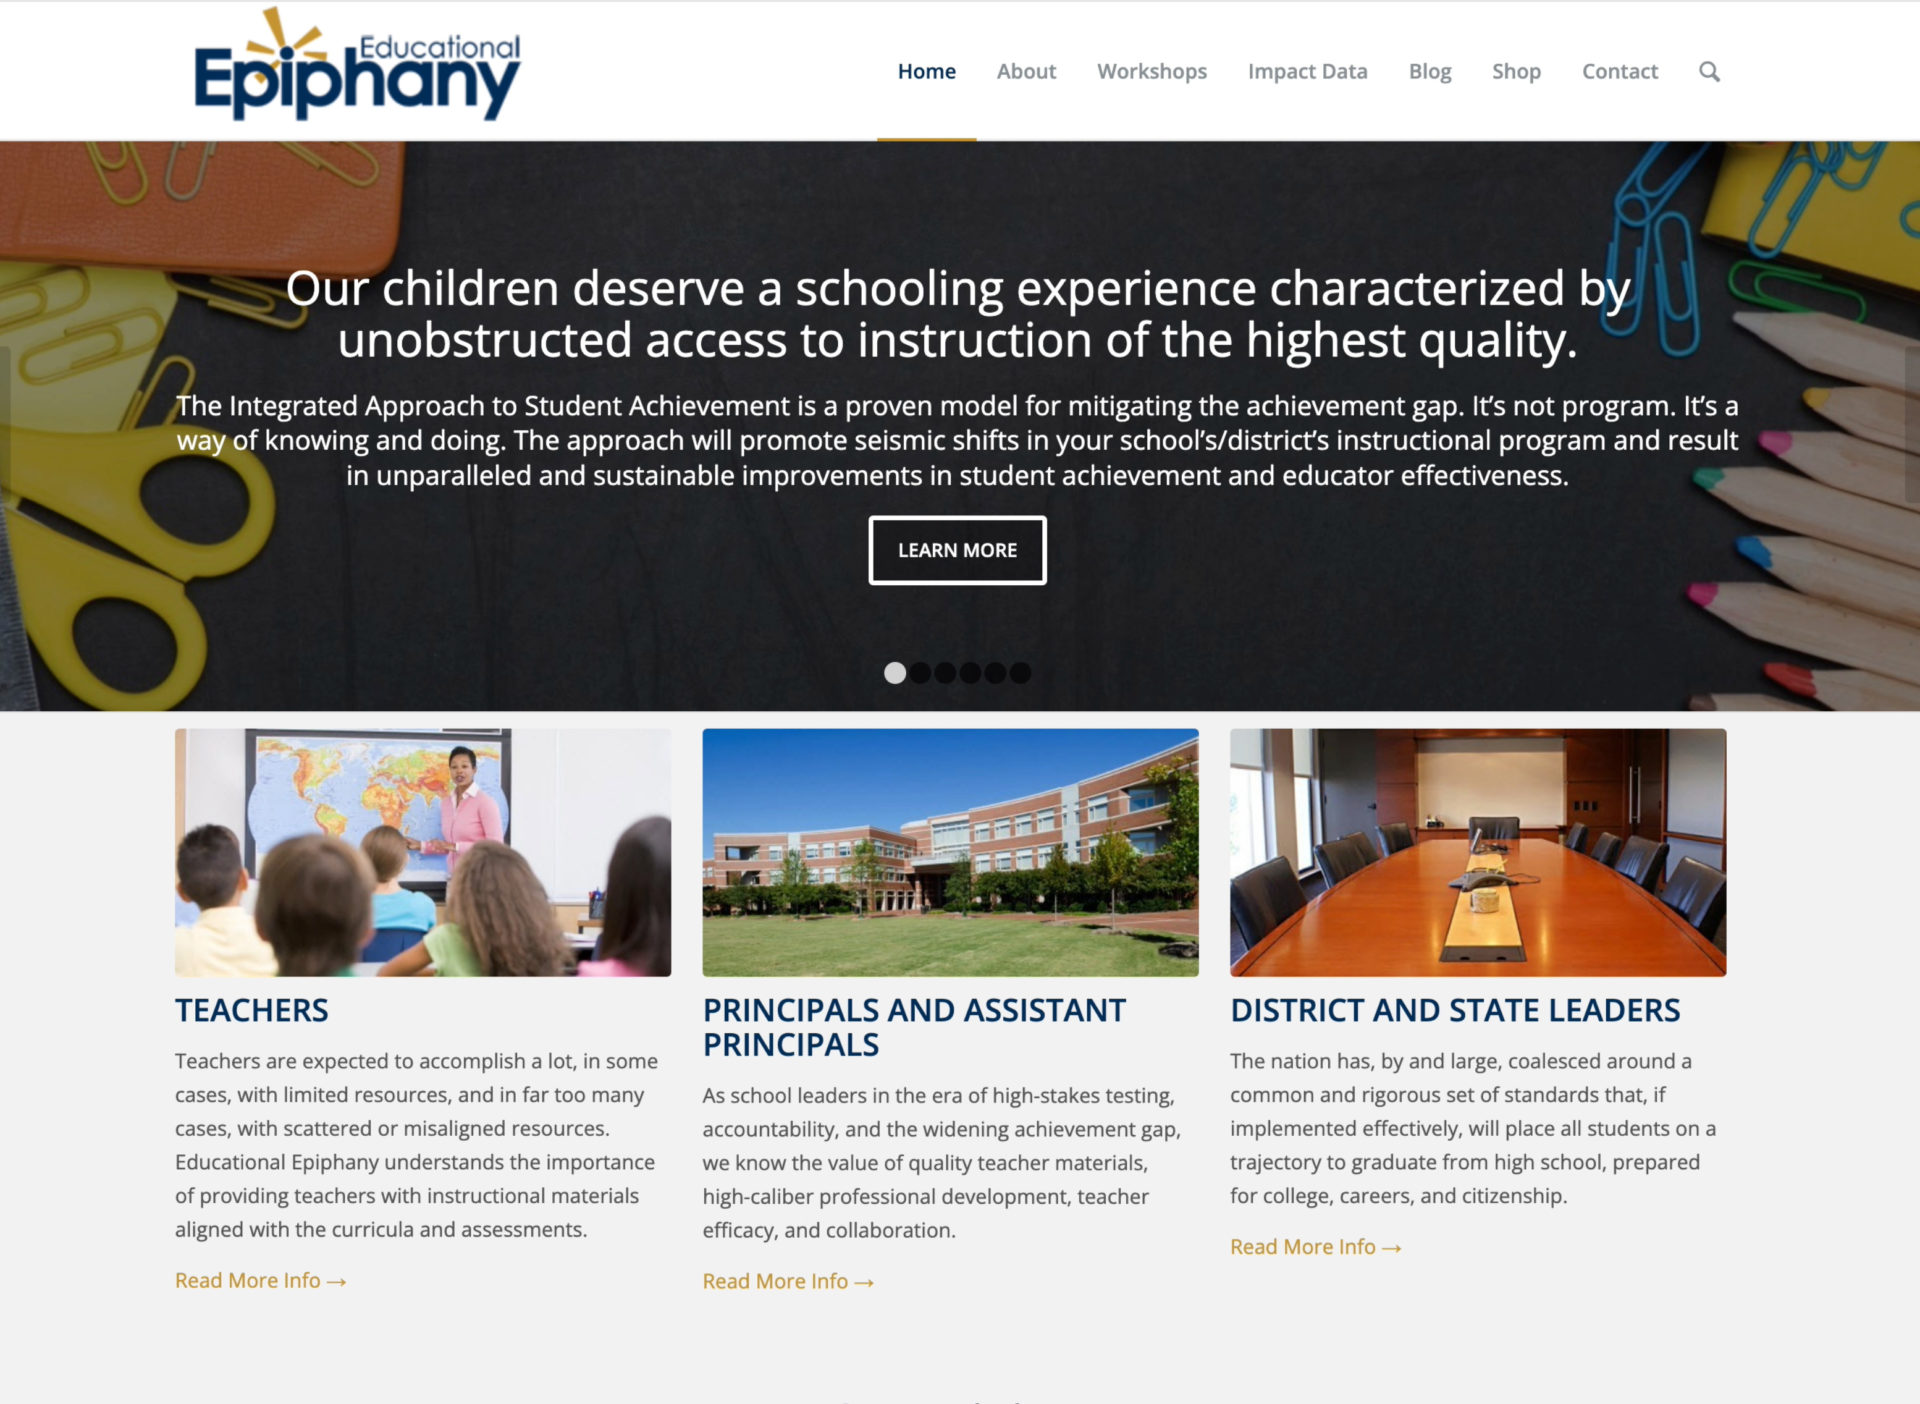 Educational Epiphany's Previous website